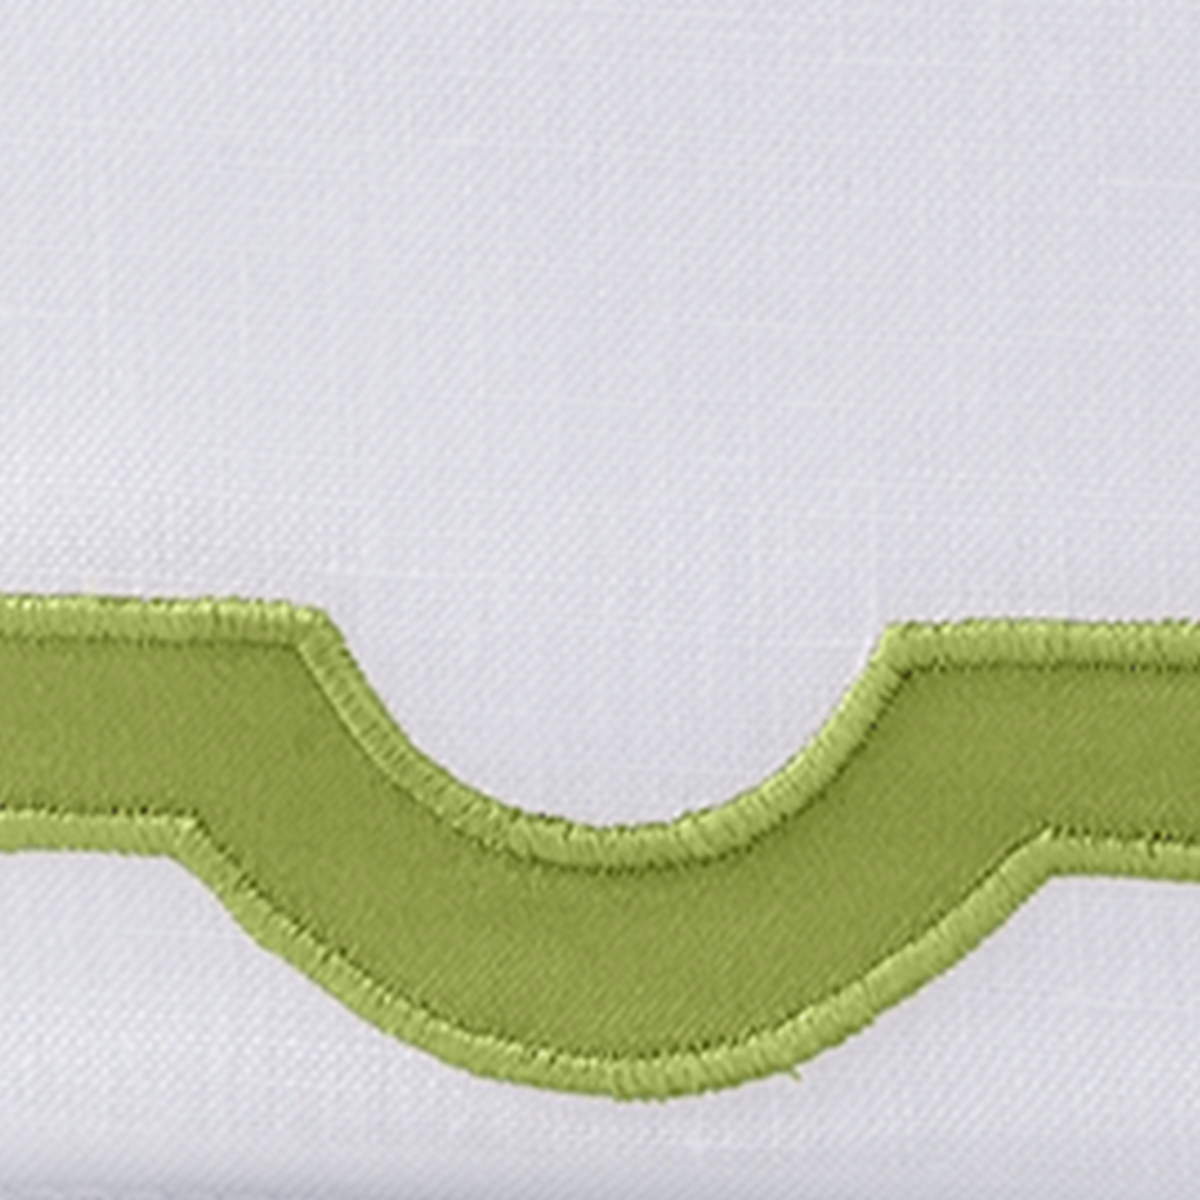 Swatch Sample of Matouk Mirasol Tissue Box Cover in Grass Color